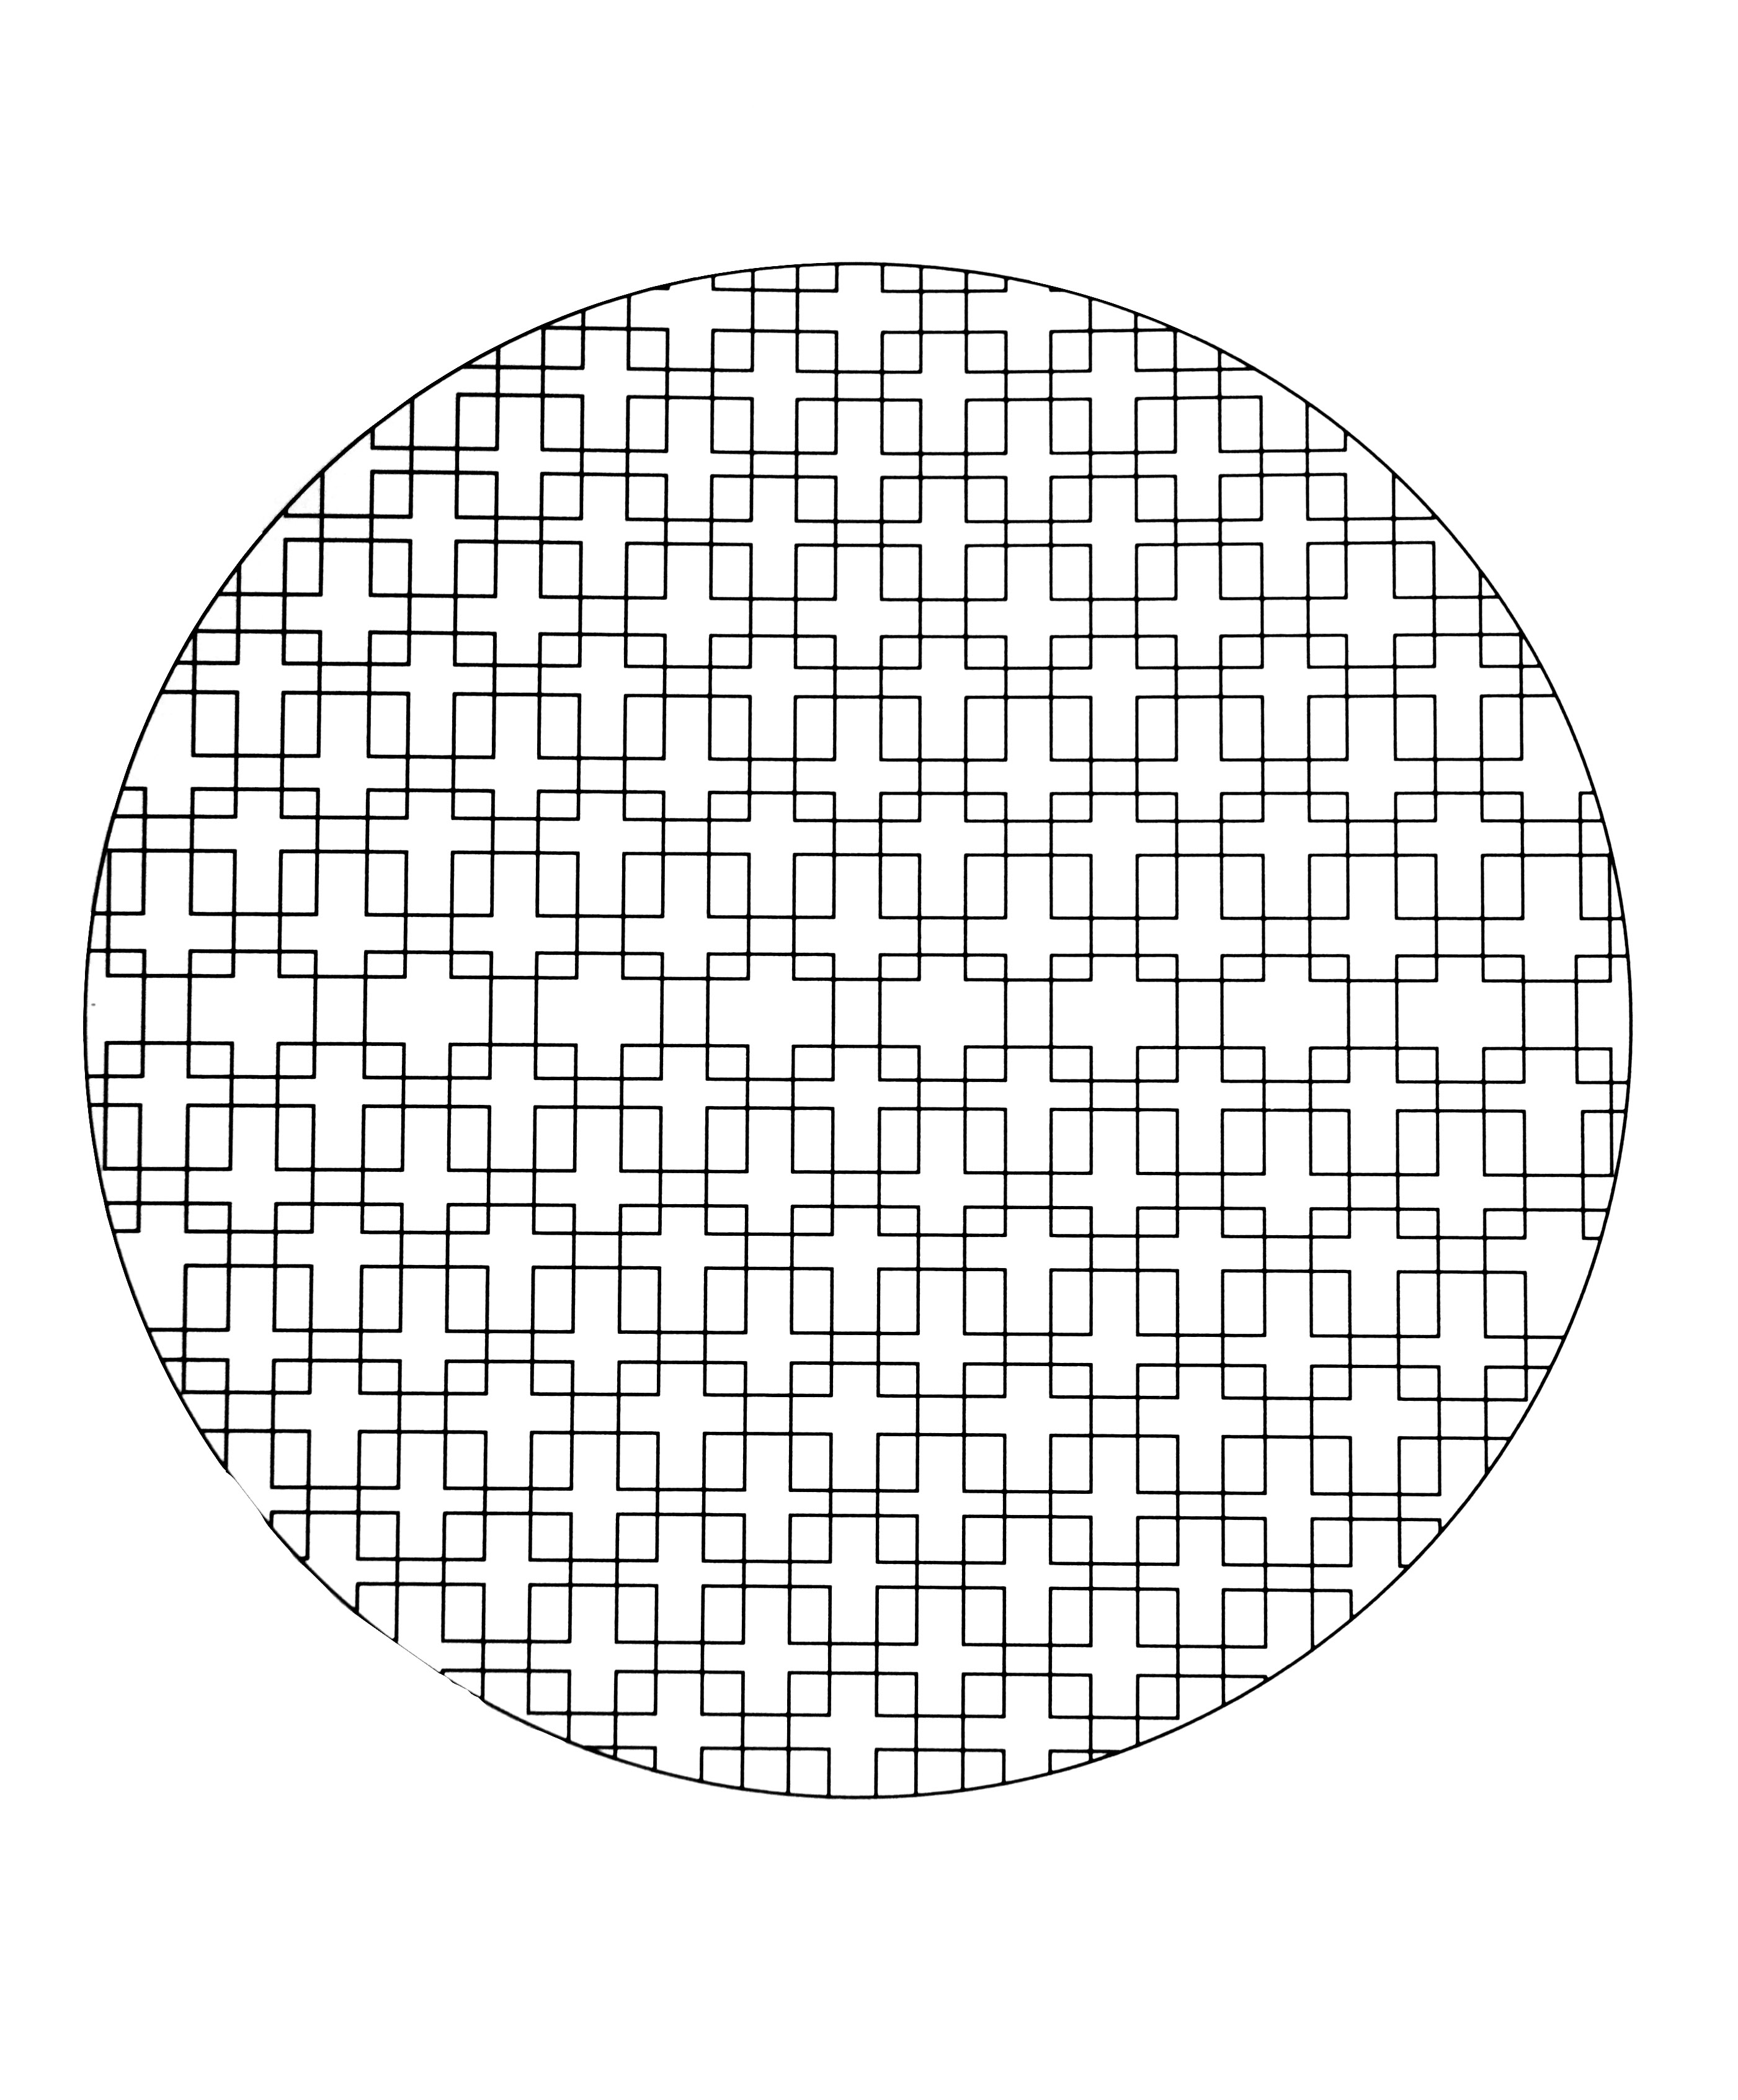 A circle with squares inside, organized to form a strange structure